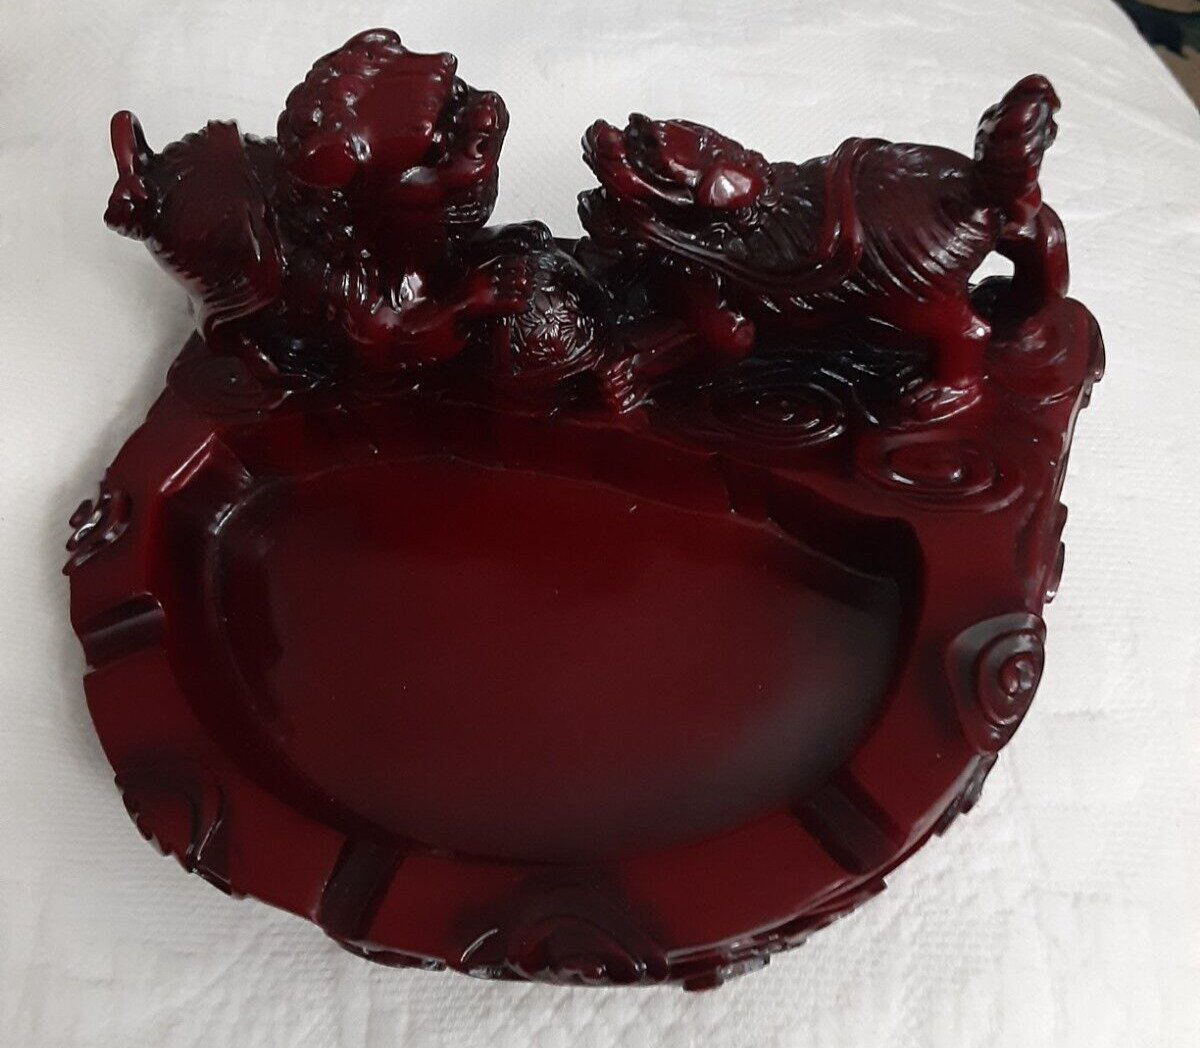 Vintage Rosewood Pixiu Ashtray Decorative Piece Deep Red Asian Influence Dragons